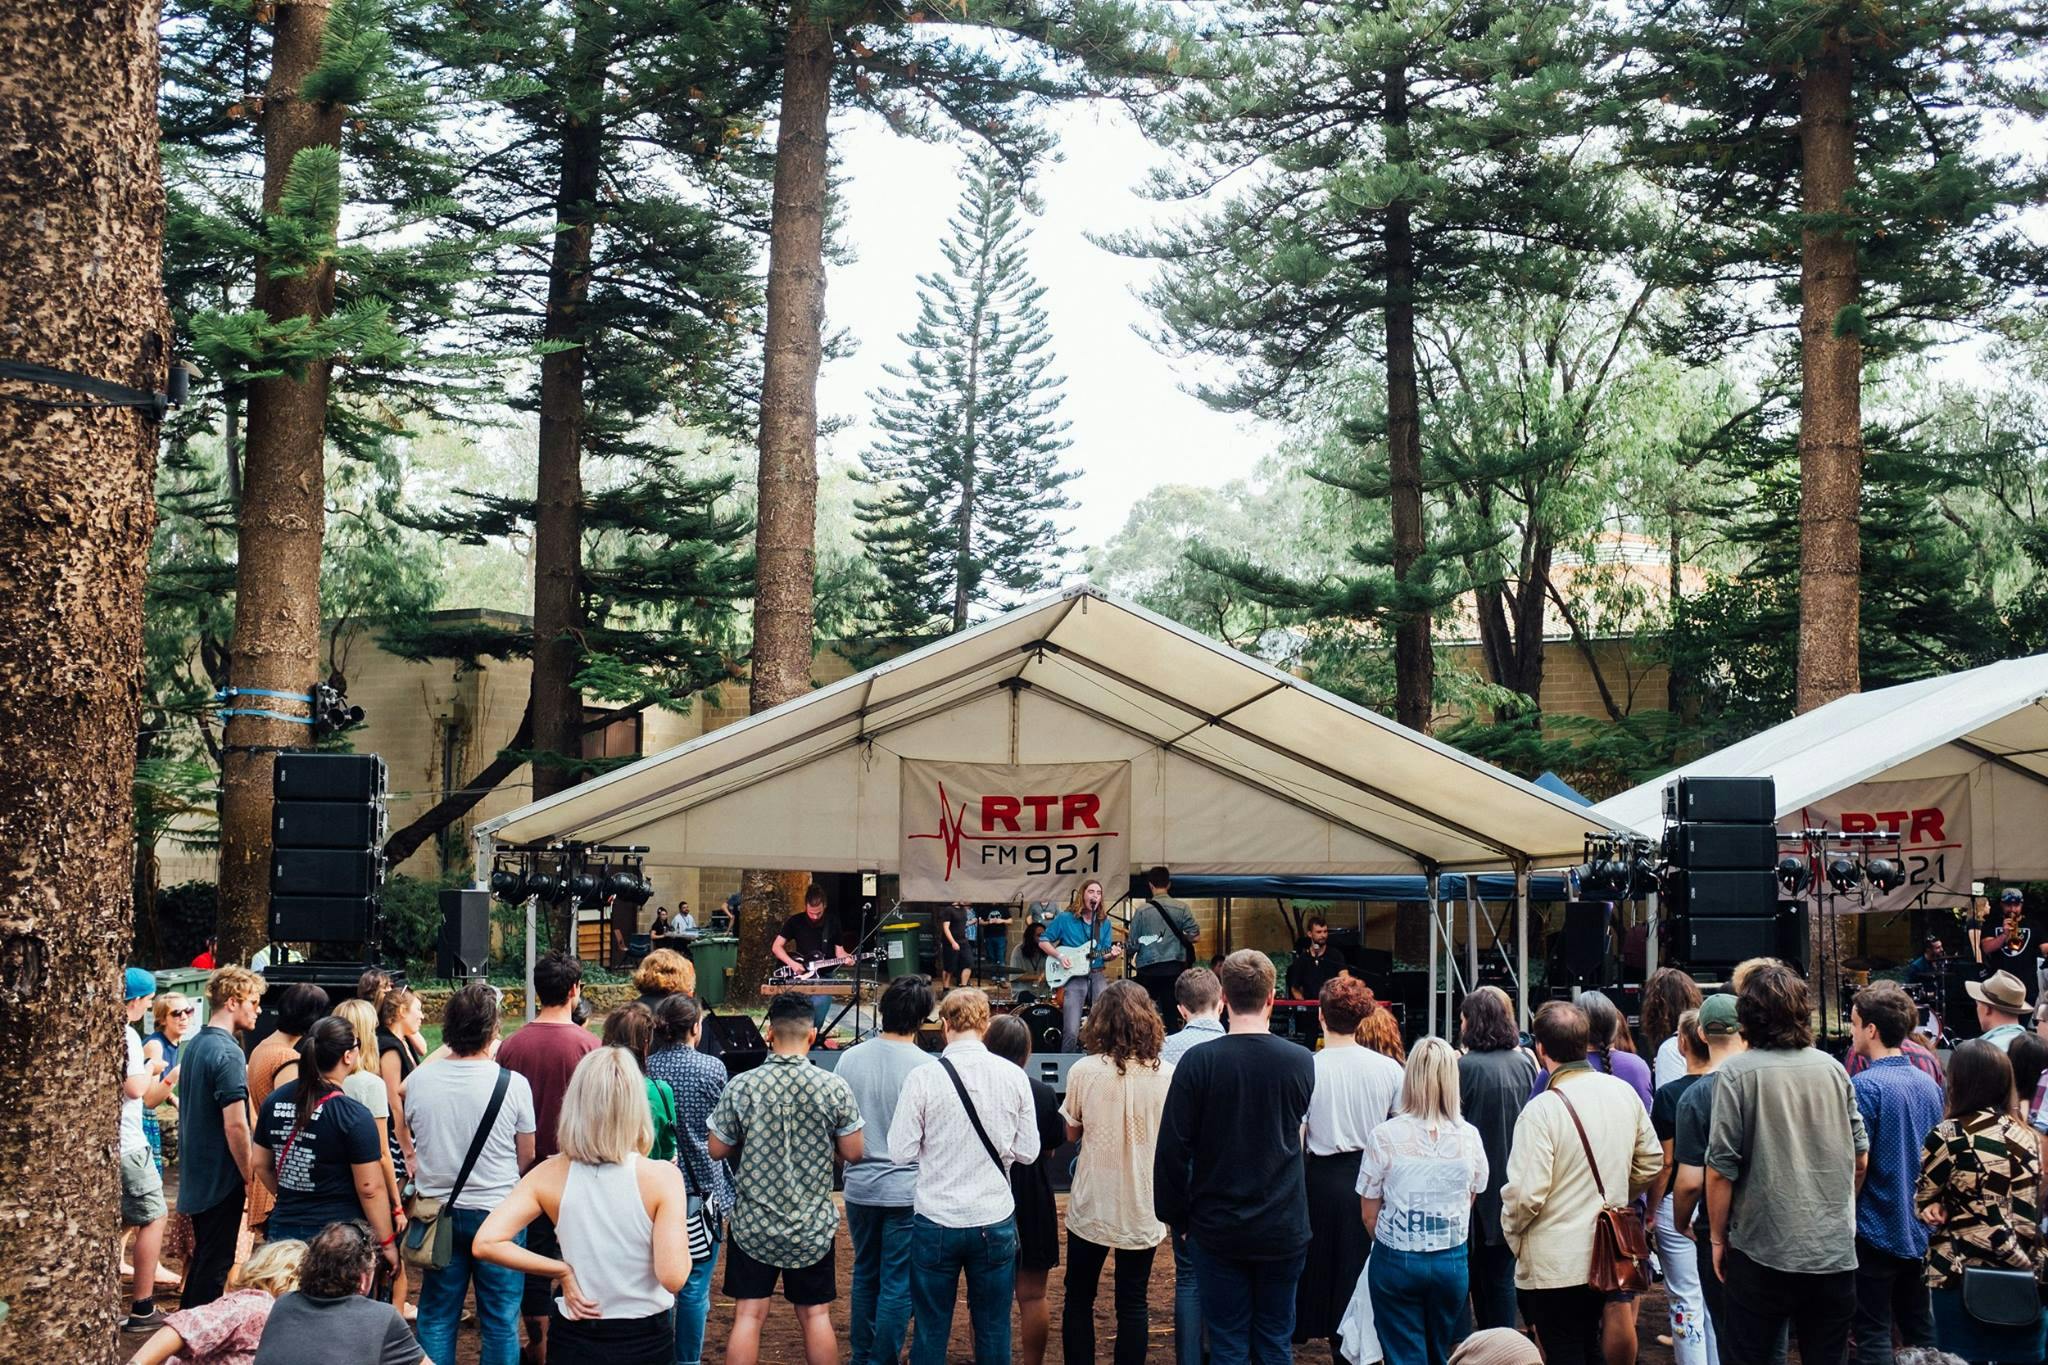 RTRFM In The Pines 30th Birthday